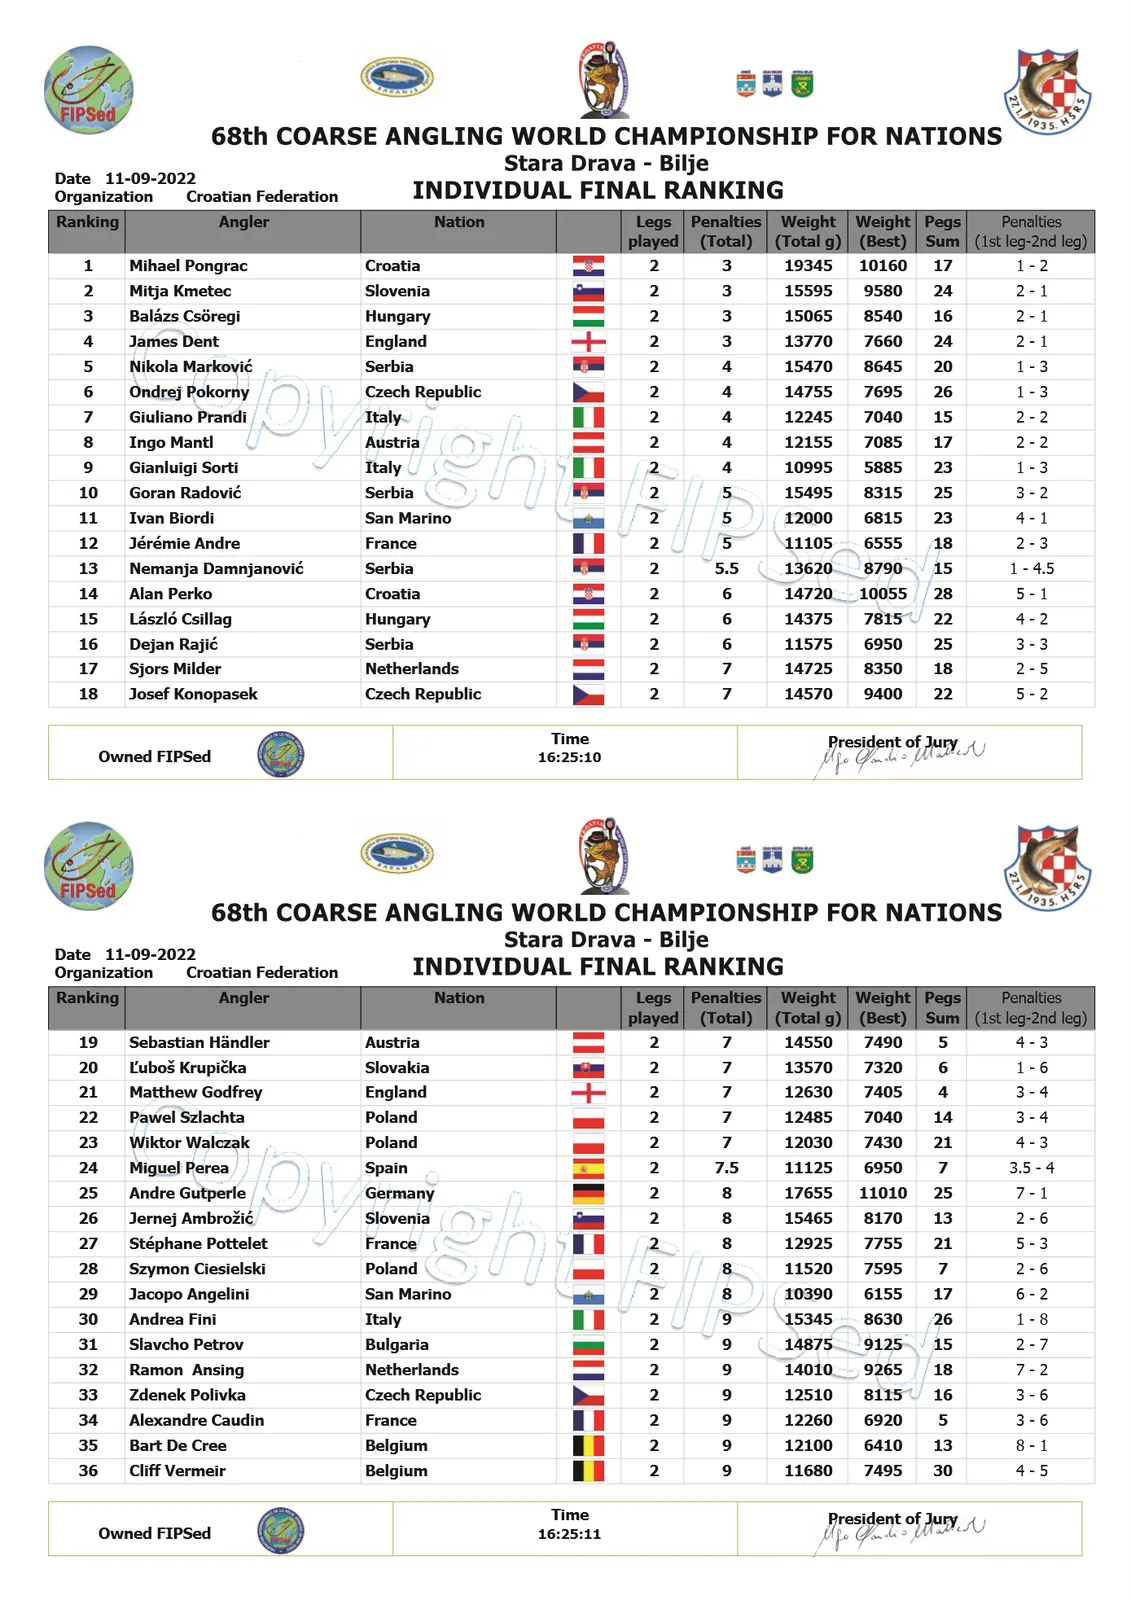 w2 68th Coarse Angling World Championship for Nations 2022